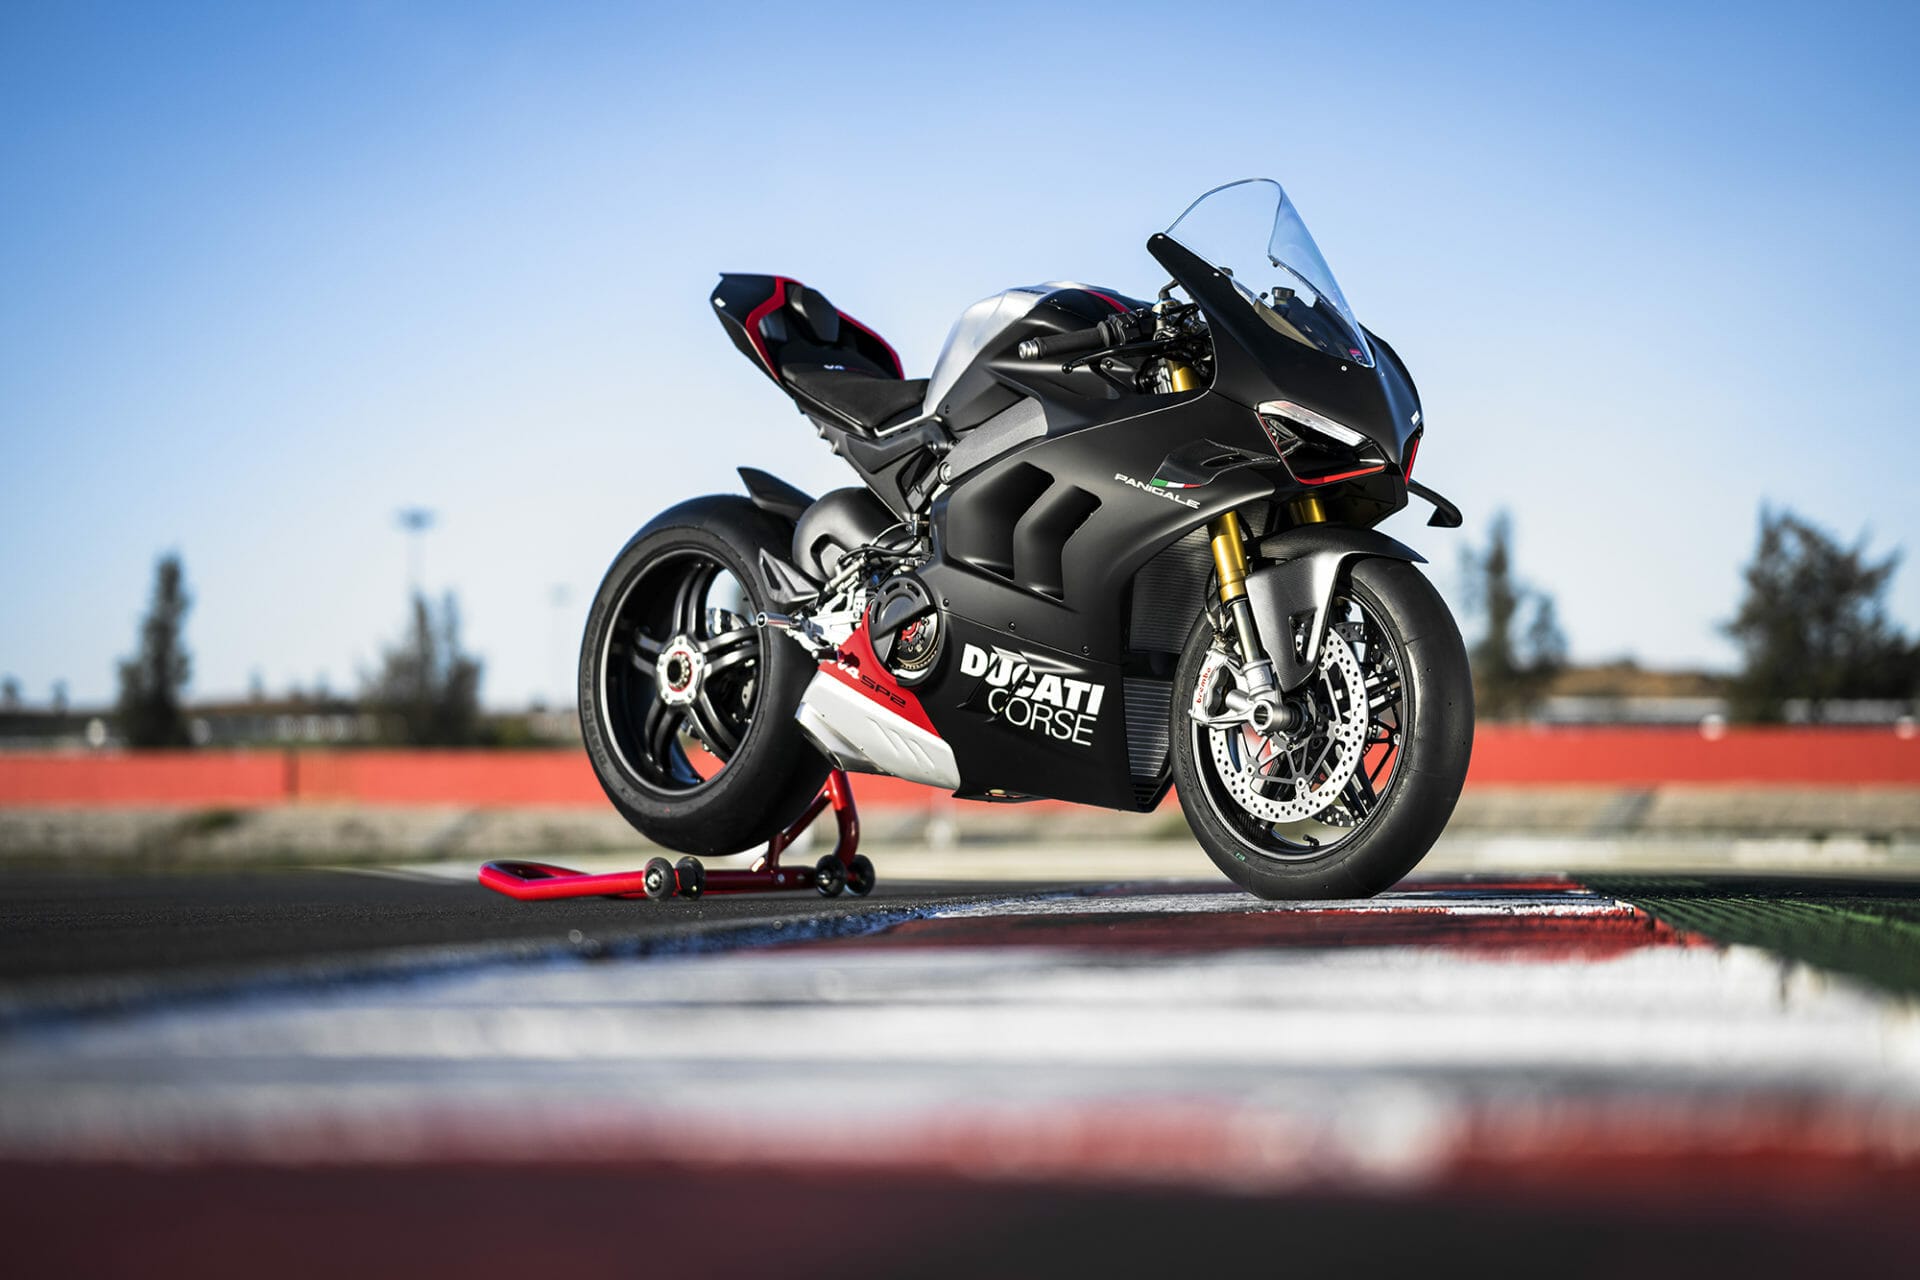 Ducati Panigale V4 gets electronics update - MOTORCYCLES.NEWS